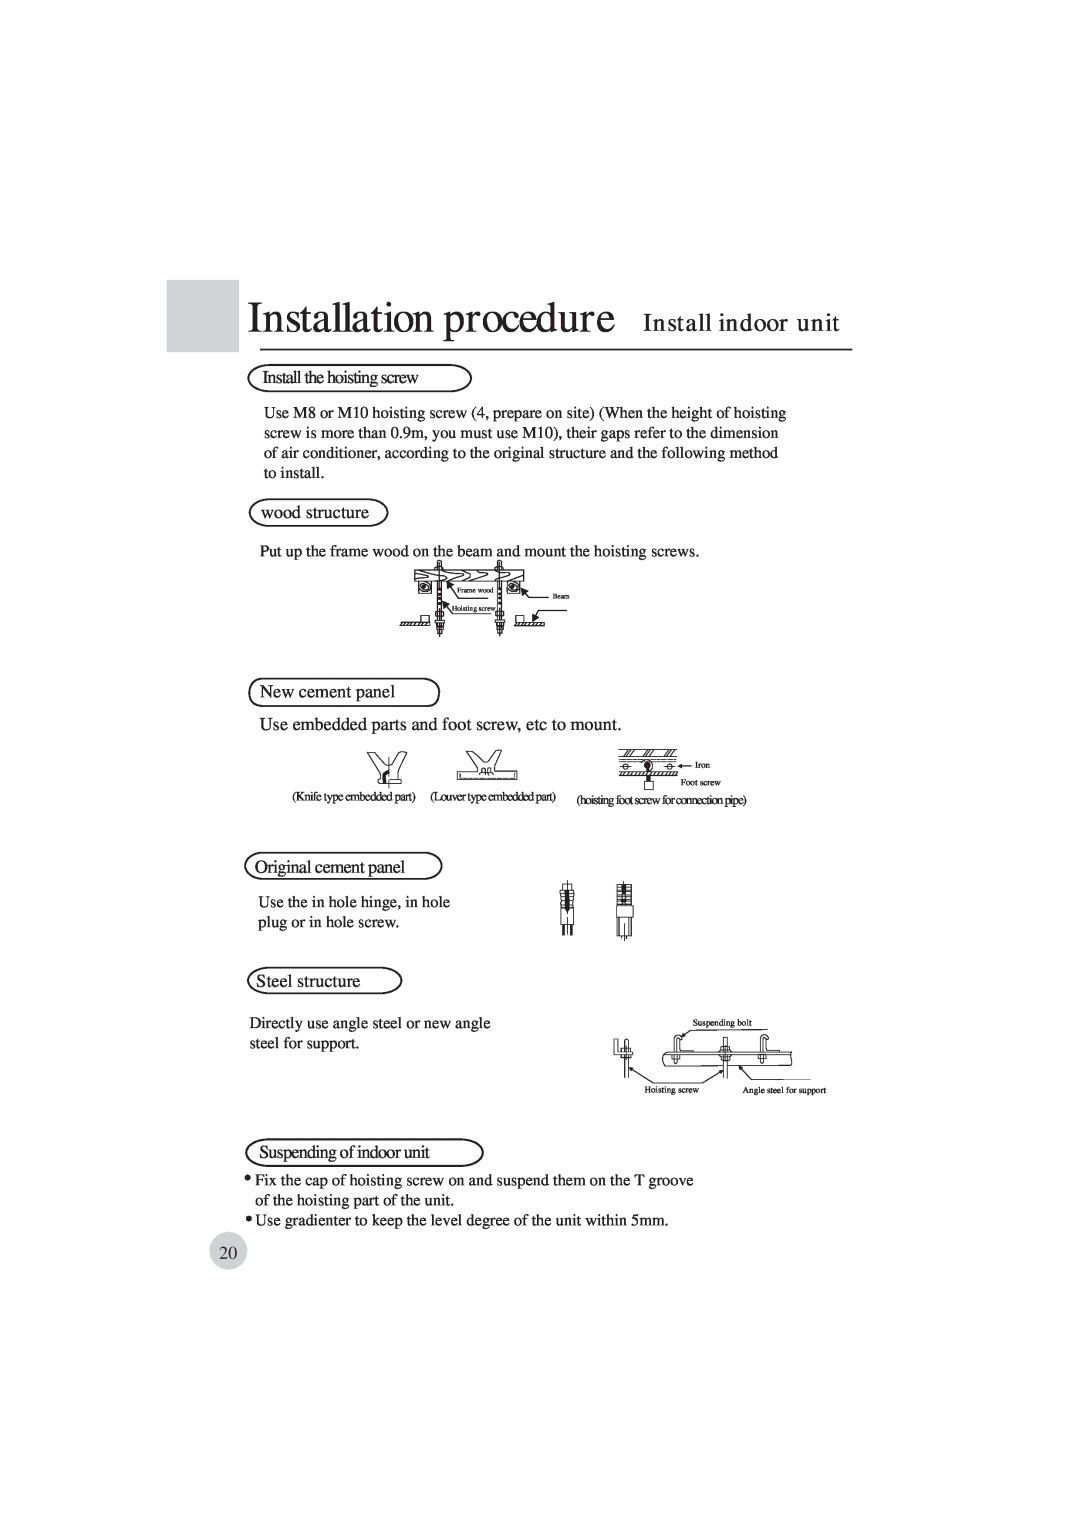 Haier AE122BCAAA (H2EM-18H03) Installation procedure Install indoor unit, Install the hoisting screw, wood structure, Iron 